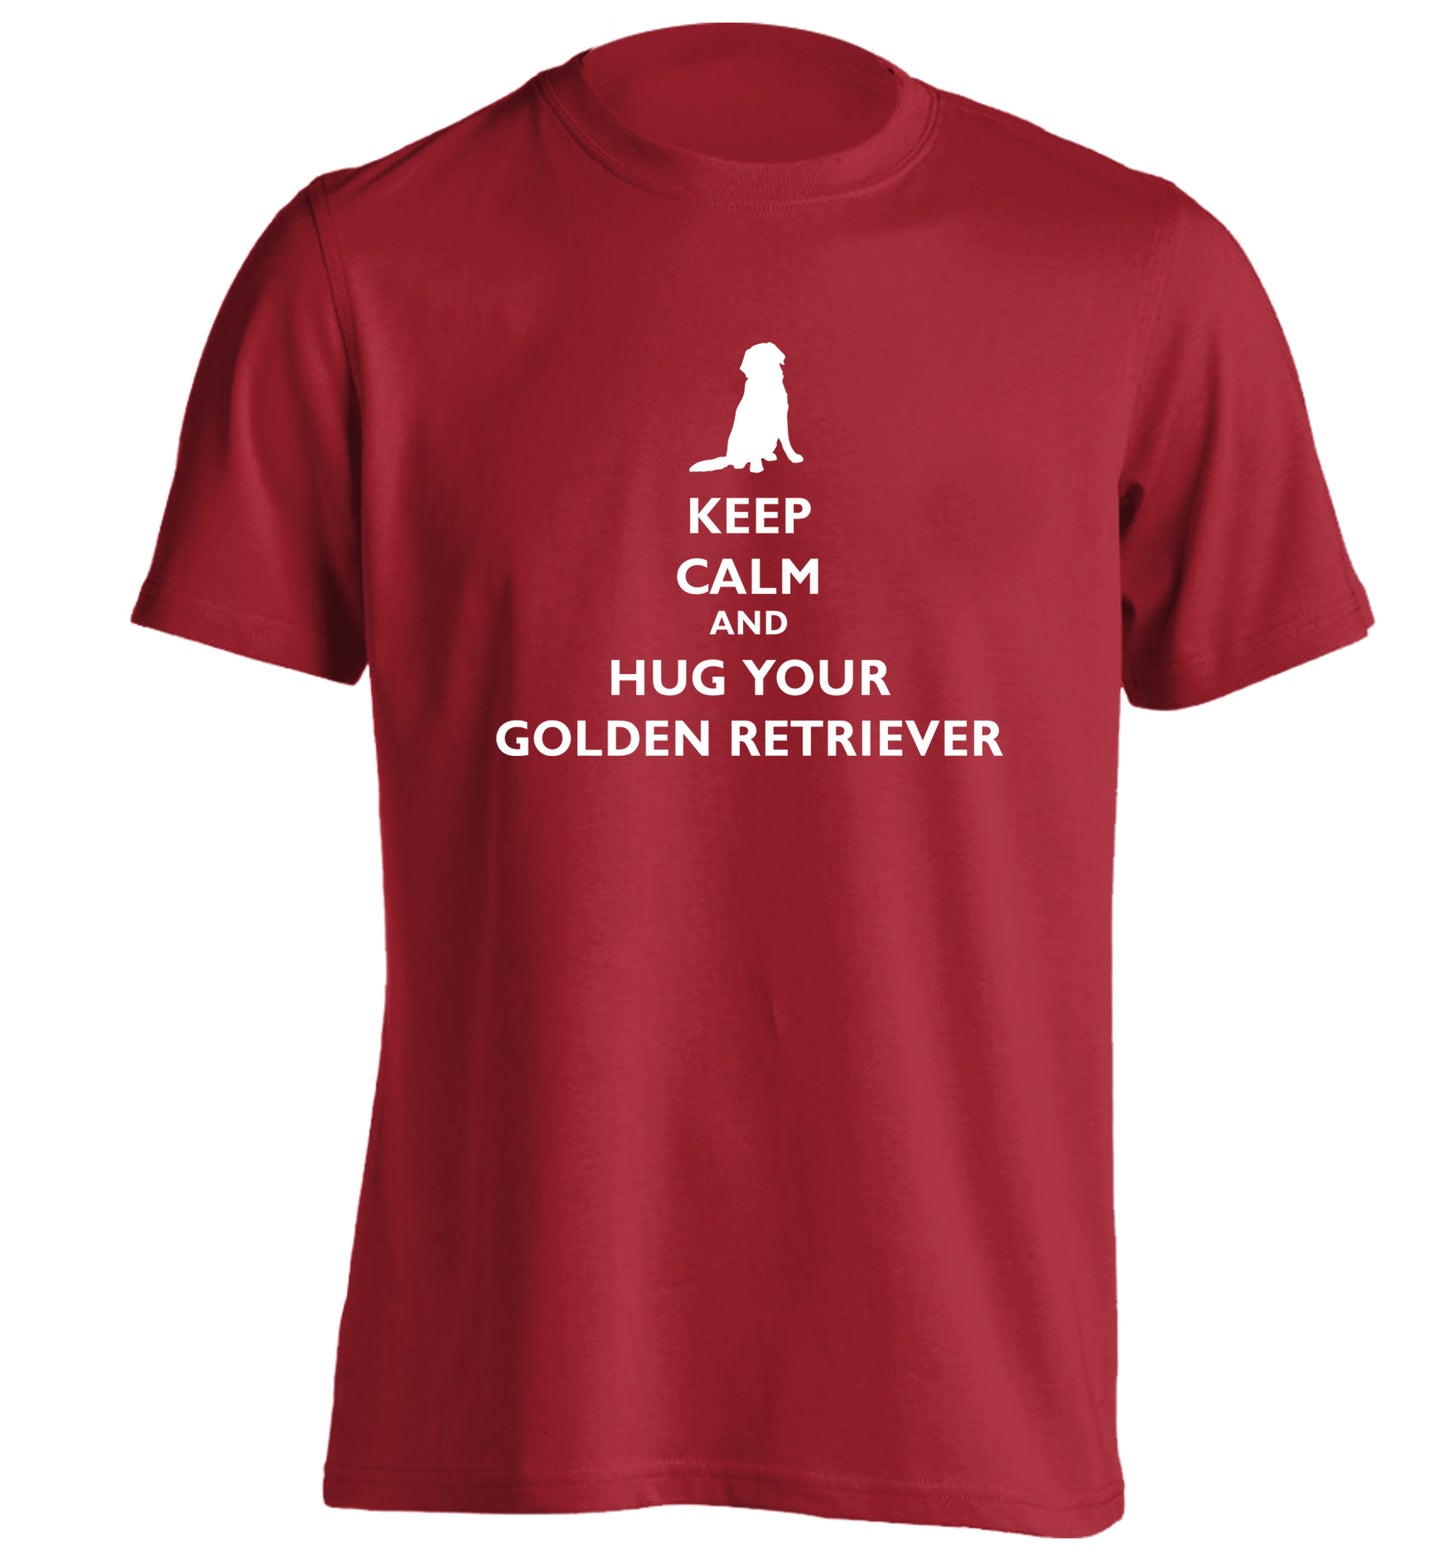 Keep calm and hug your golden retriever adults unisex red Tshirt 2XL